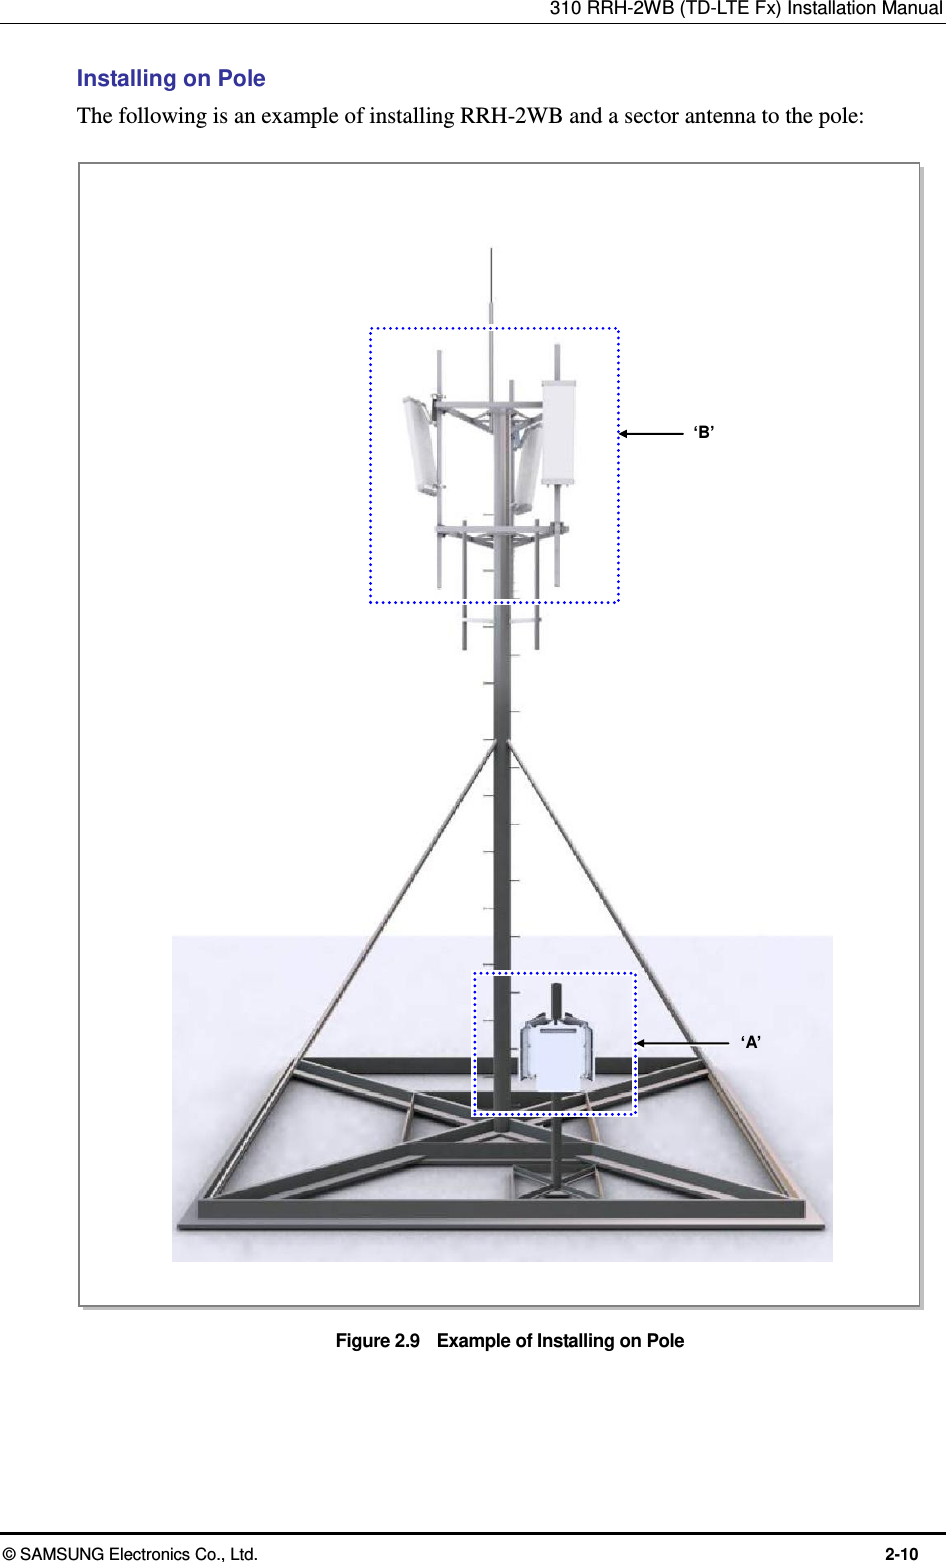 310 RRH-2WB (TD-LTE Fx) Installation Manual  © SAMSUNG Electronics Co., Ltd.  2-10 Installing on Pole The following is an example of installing RRH-2WB and a sector antenna to the pole:  Figure 2.9    Example of Installing on Pole  ‘B’ ‘A’ 